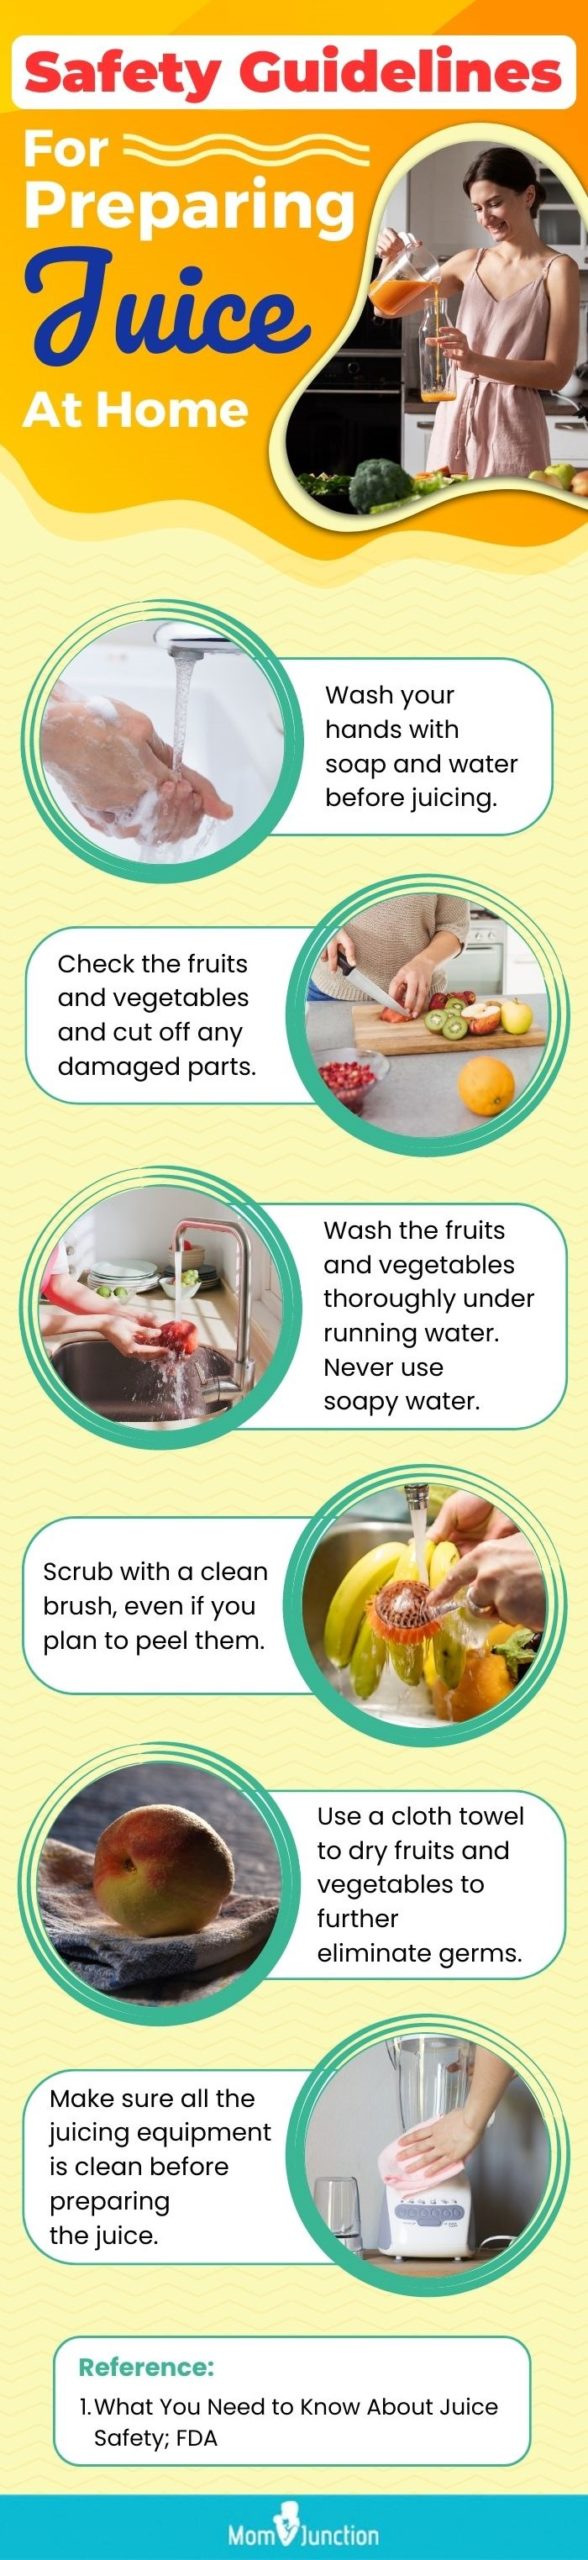 https://www.momjunction.com/wp-content/uploads/2020/12/Safety-Guidelines-For-Preparing-Juice-At-Home-scaled.jpg